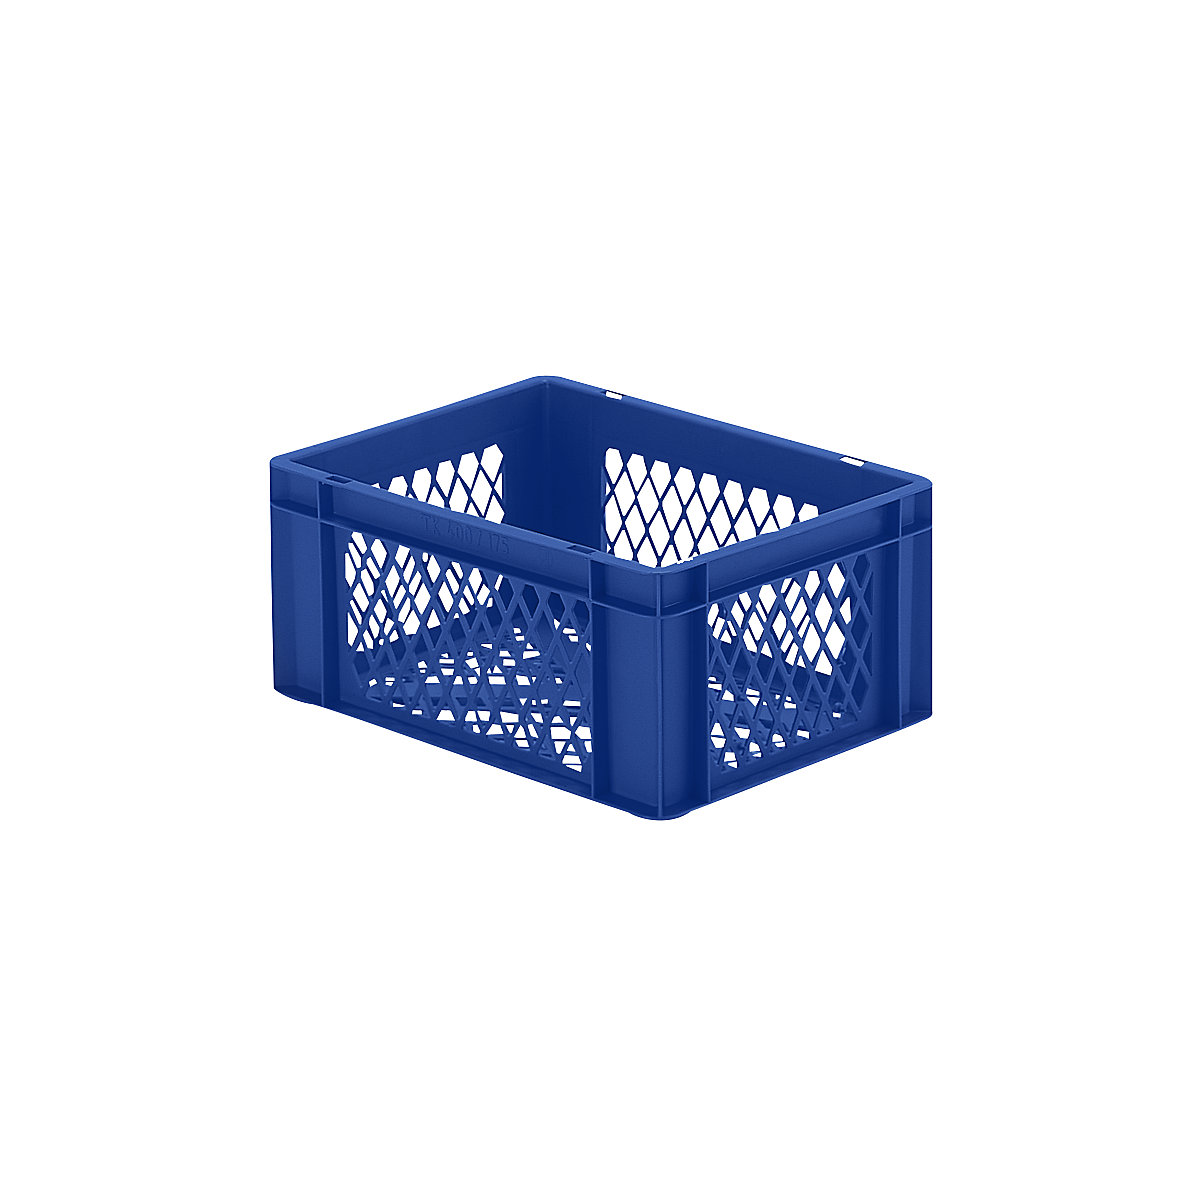 Euro stacking container, perforated walls and base, LxWxH 400 x 300 x 175 mm, blue, pack of 5